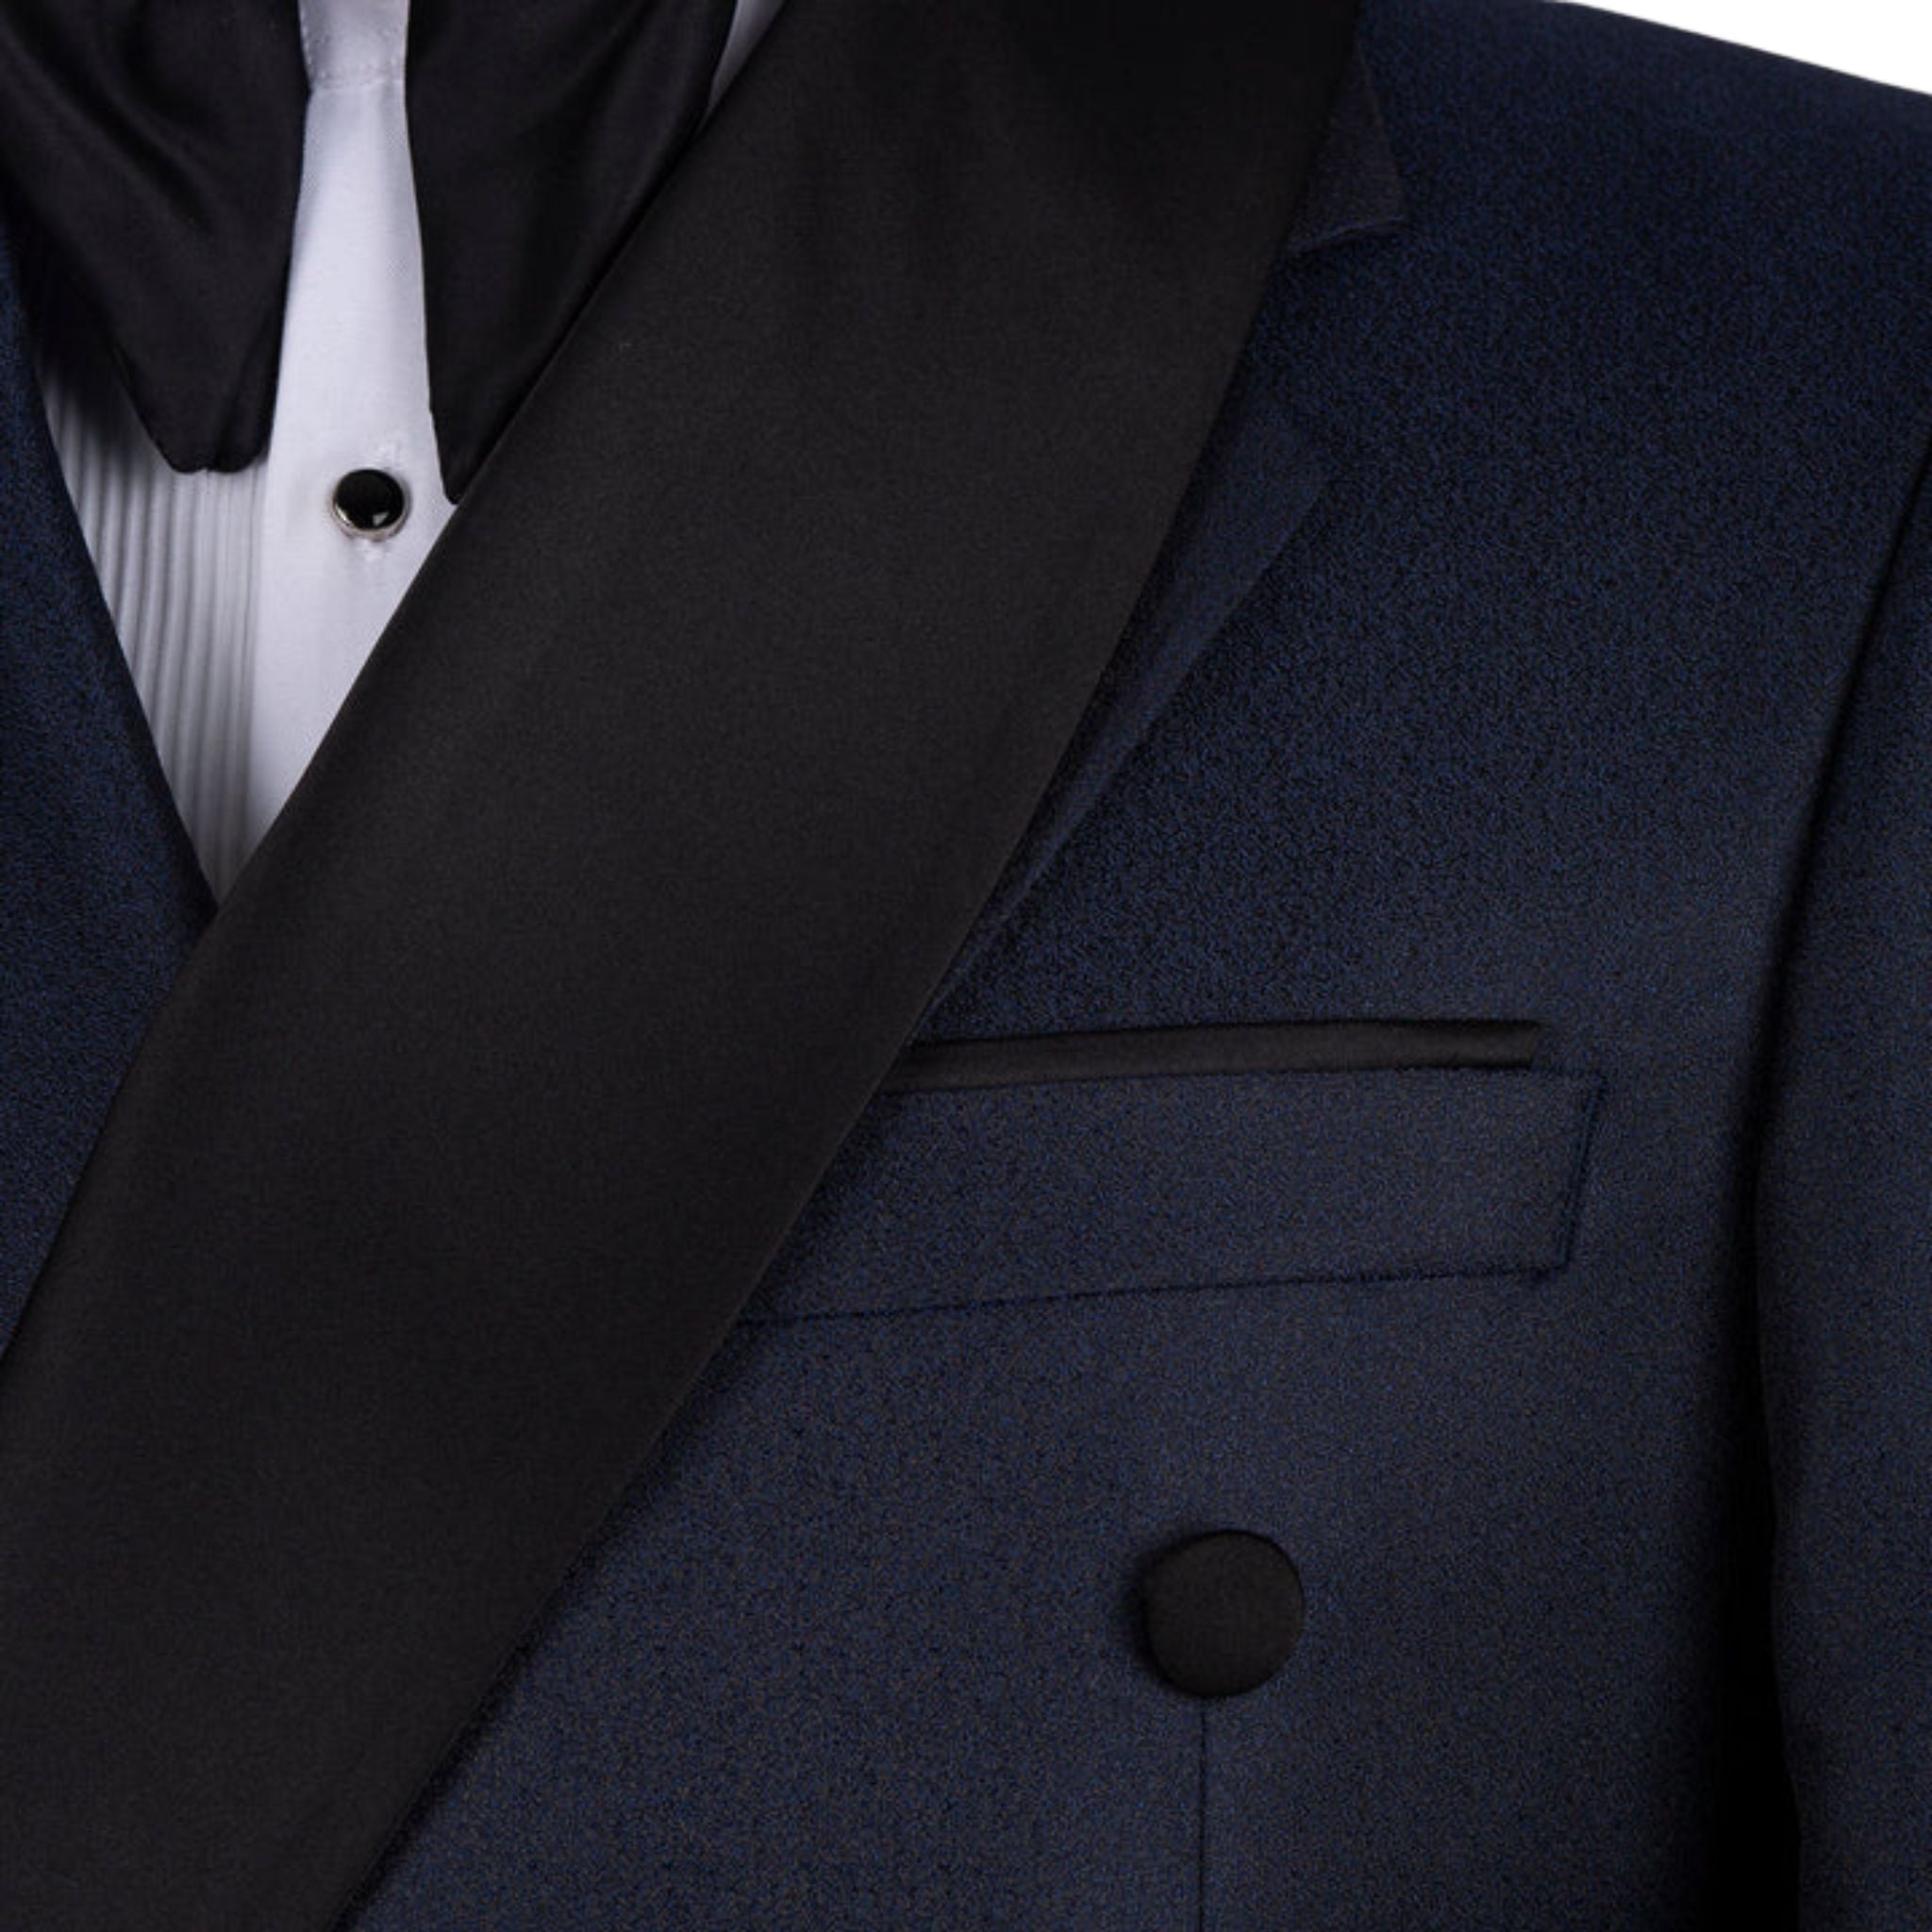 Men's Elite Collection Notch and Shawl Lapel Double Breasted Tuxedo in Navy Blue and Black - Maison de Kingsley Couture Harmonie et Fureur Spain